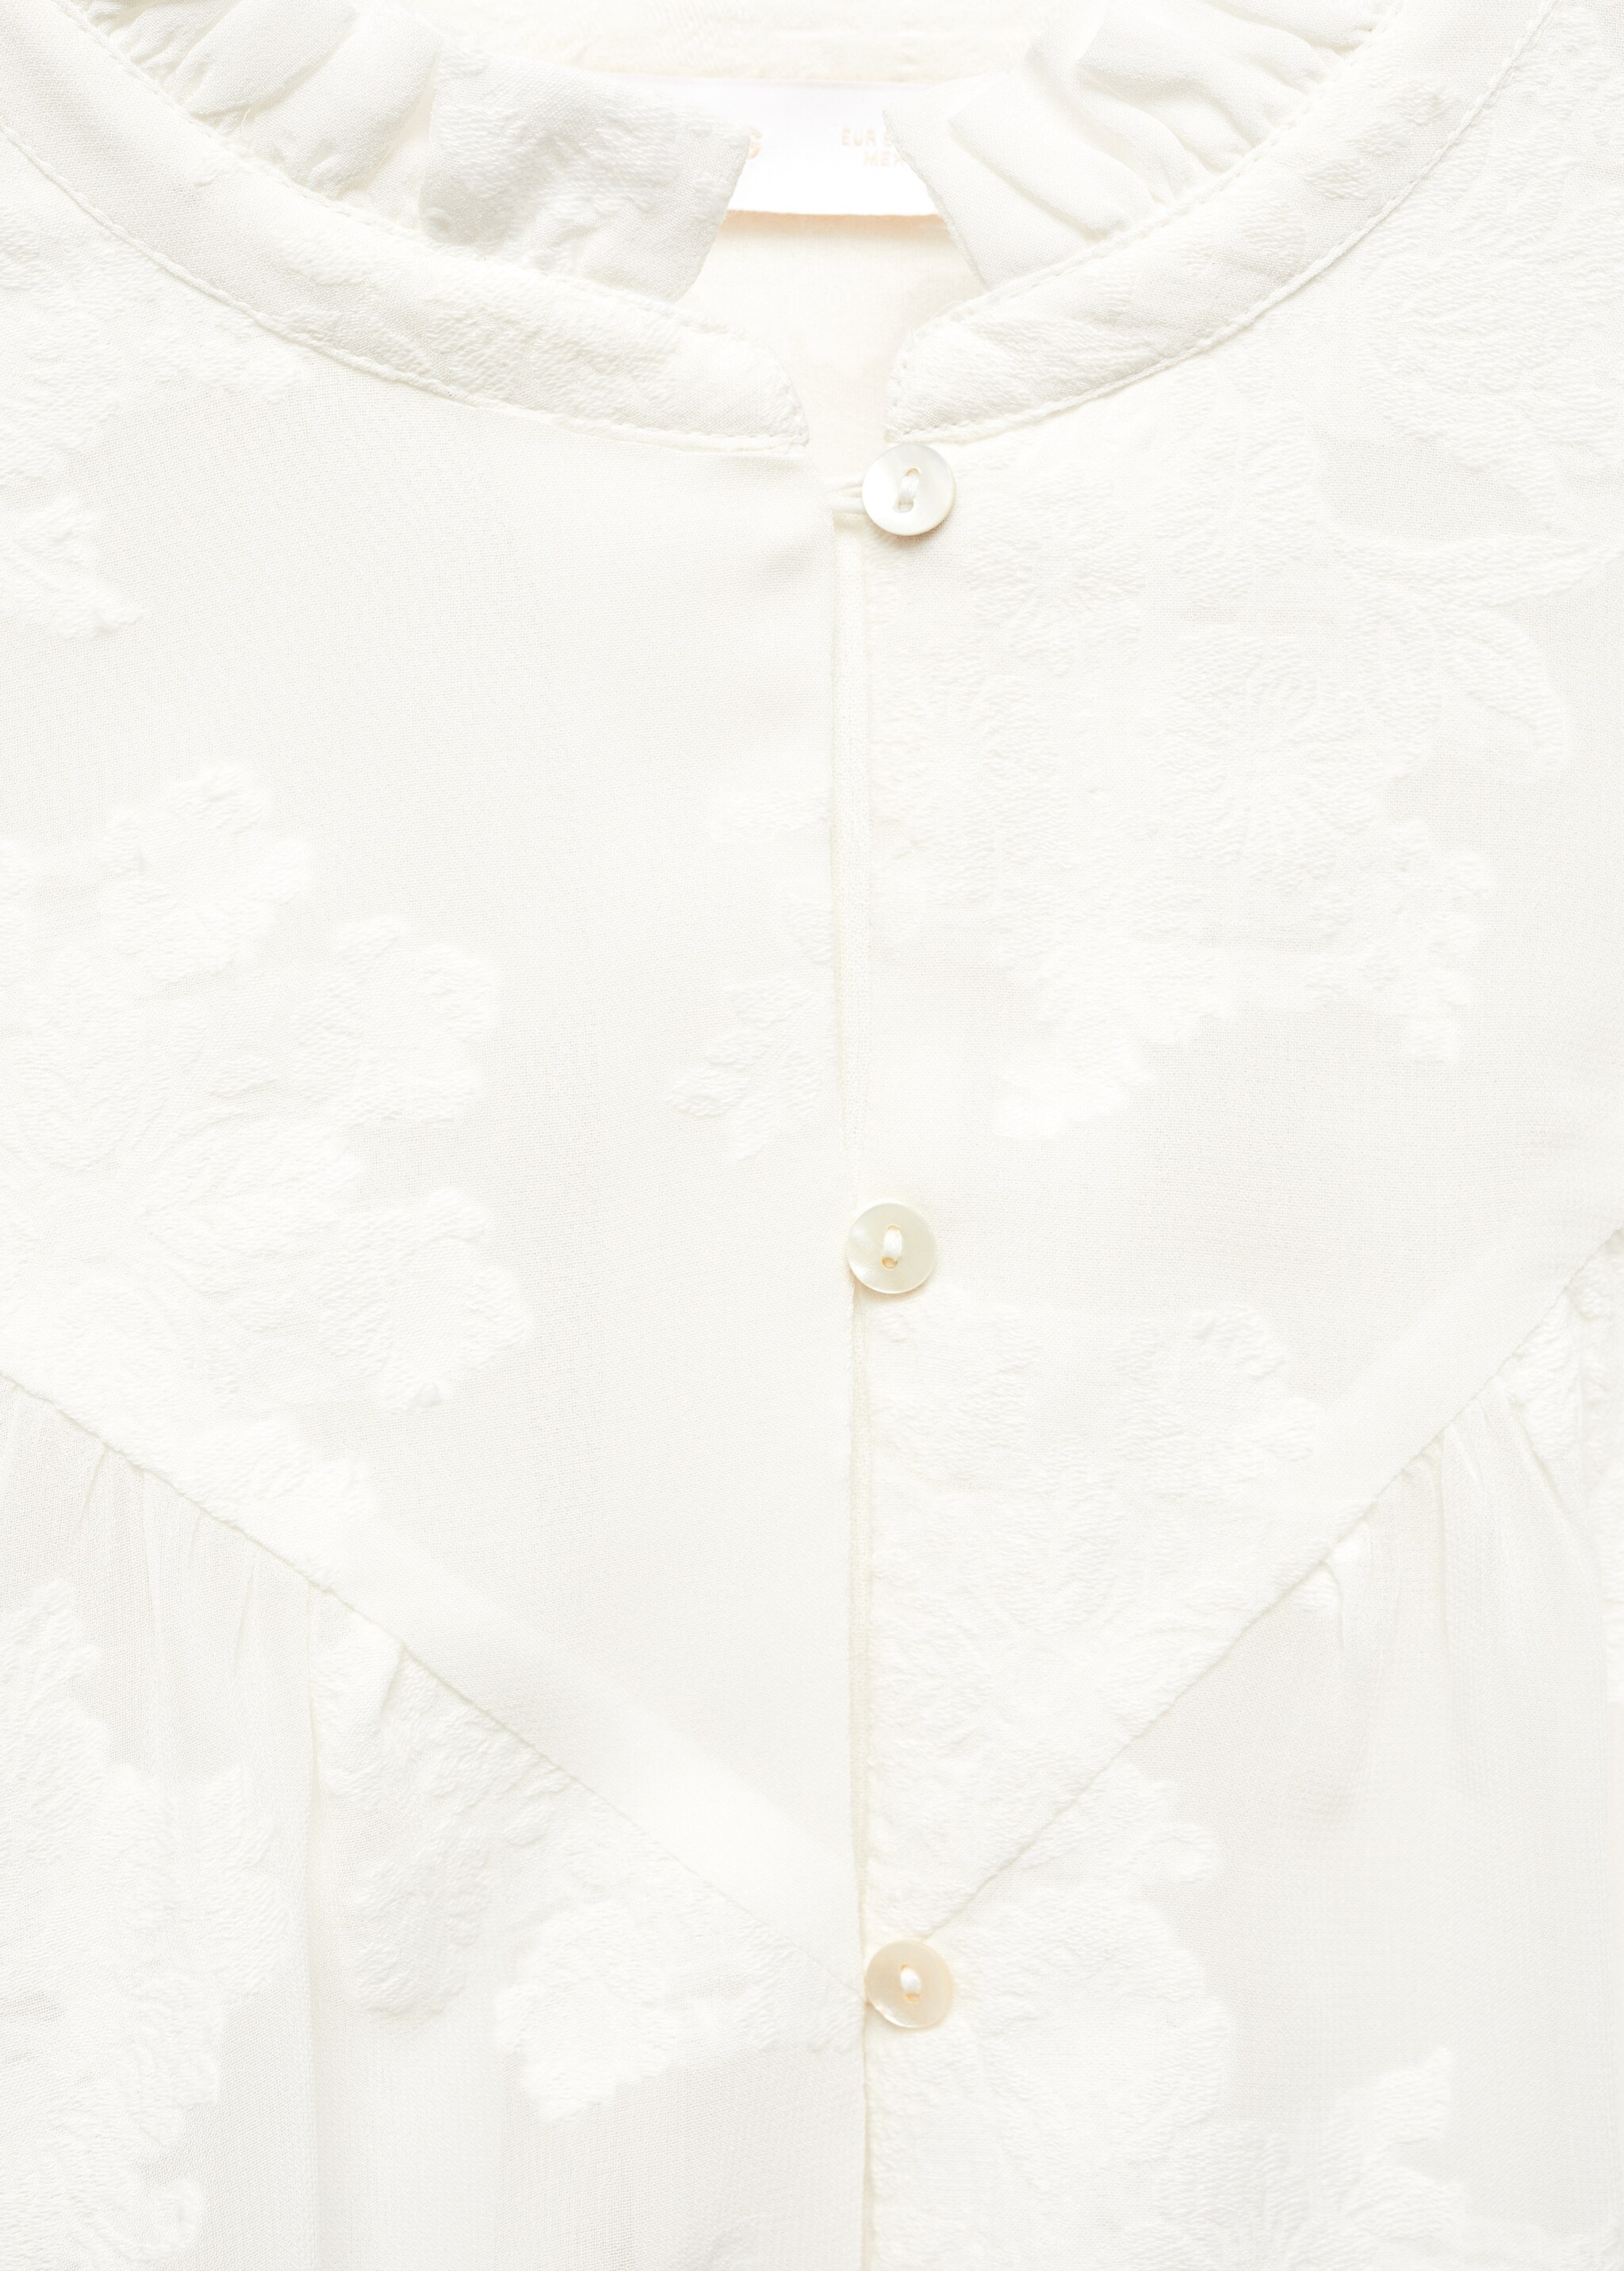 Floral embroidery blouse - Details of the article 8